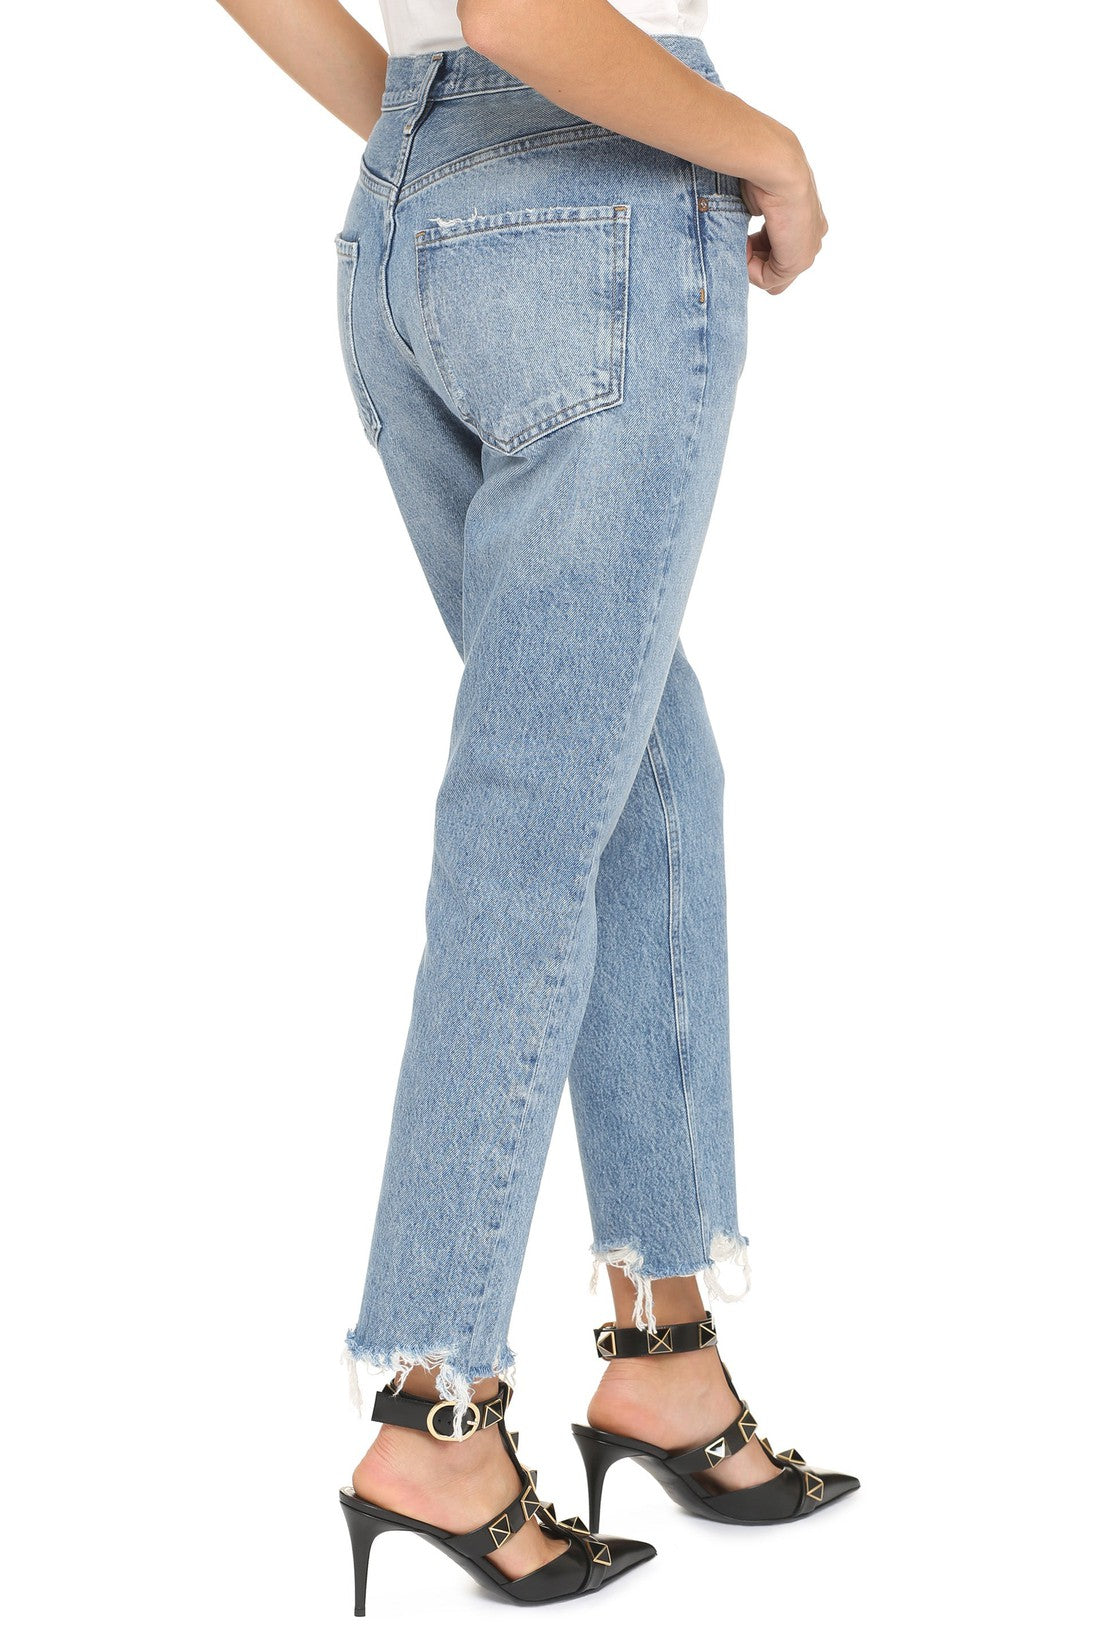 AGOLDE-OUTLET-SALE-Riley cropped straight leg jeans-ARCHIVIST